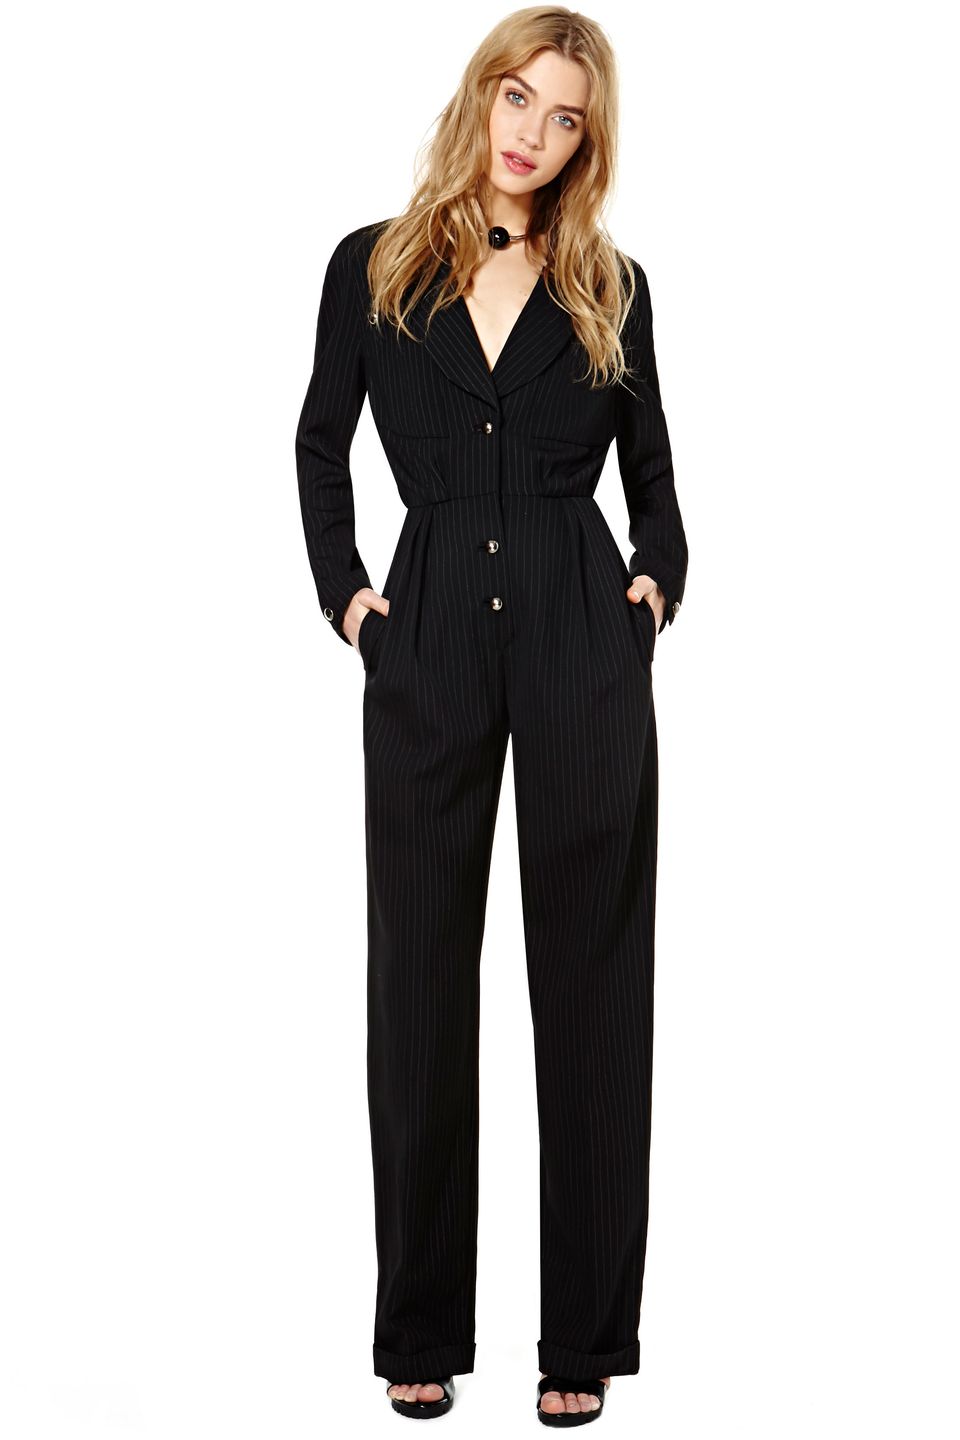 Thierry Muggler Jumpsuit